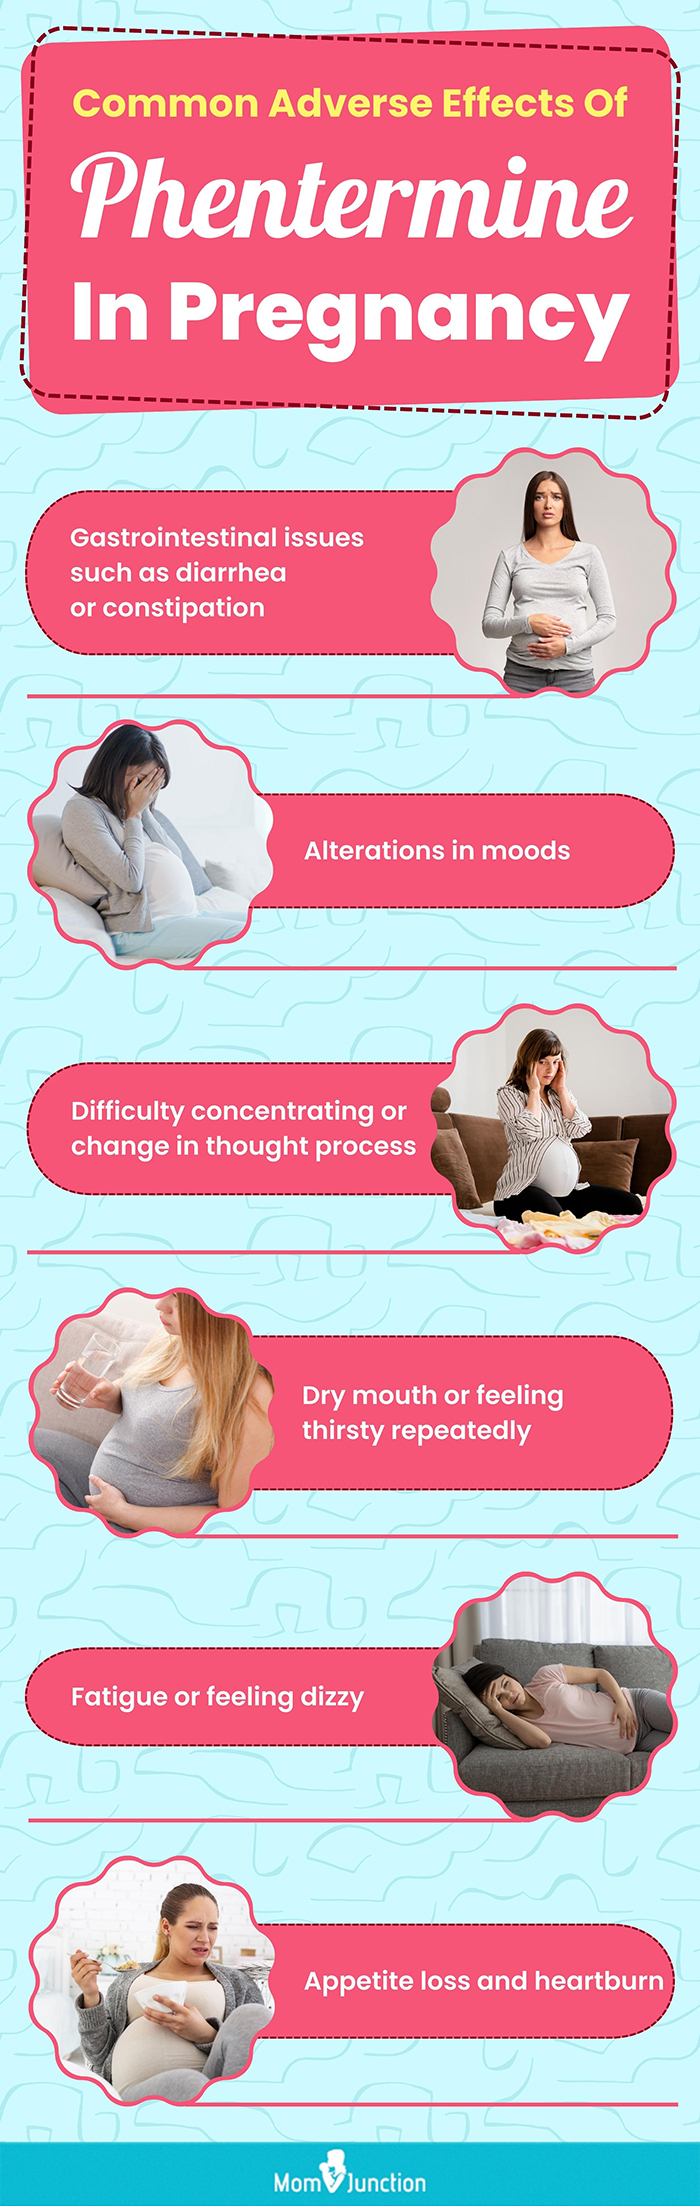 common adverse effects of phentermine in pregnancy (infographic)